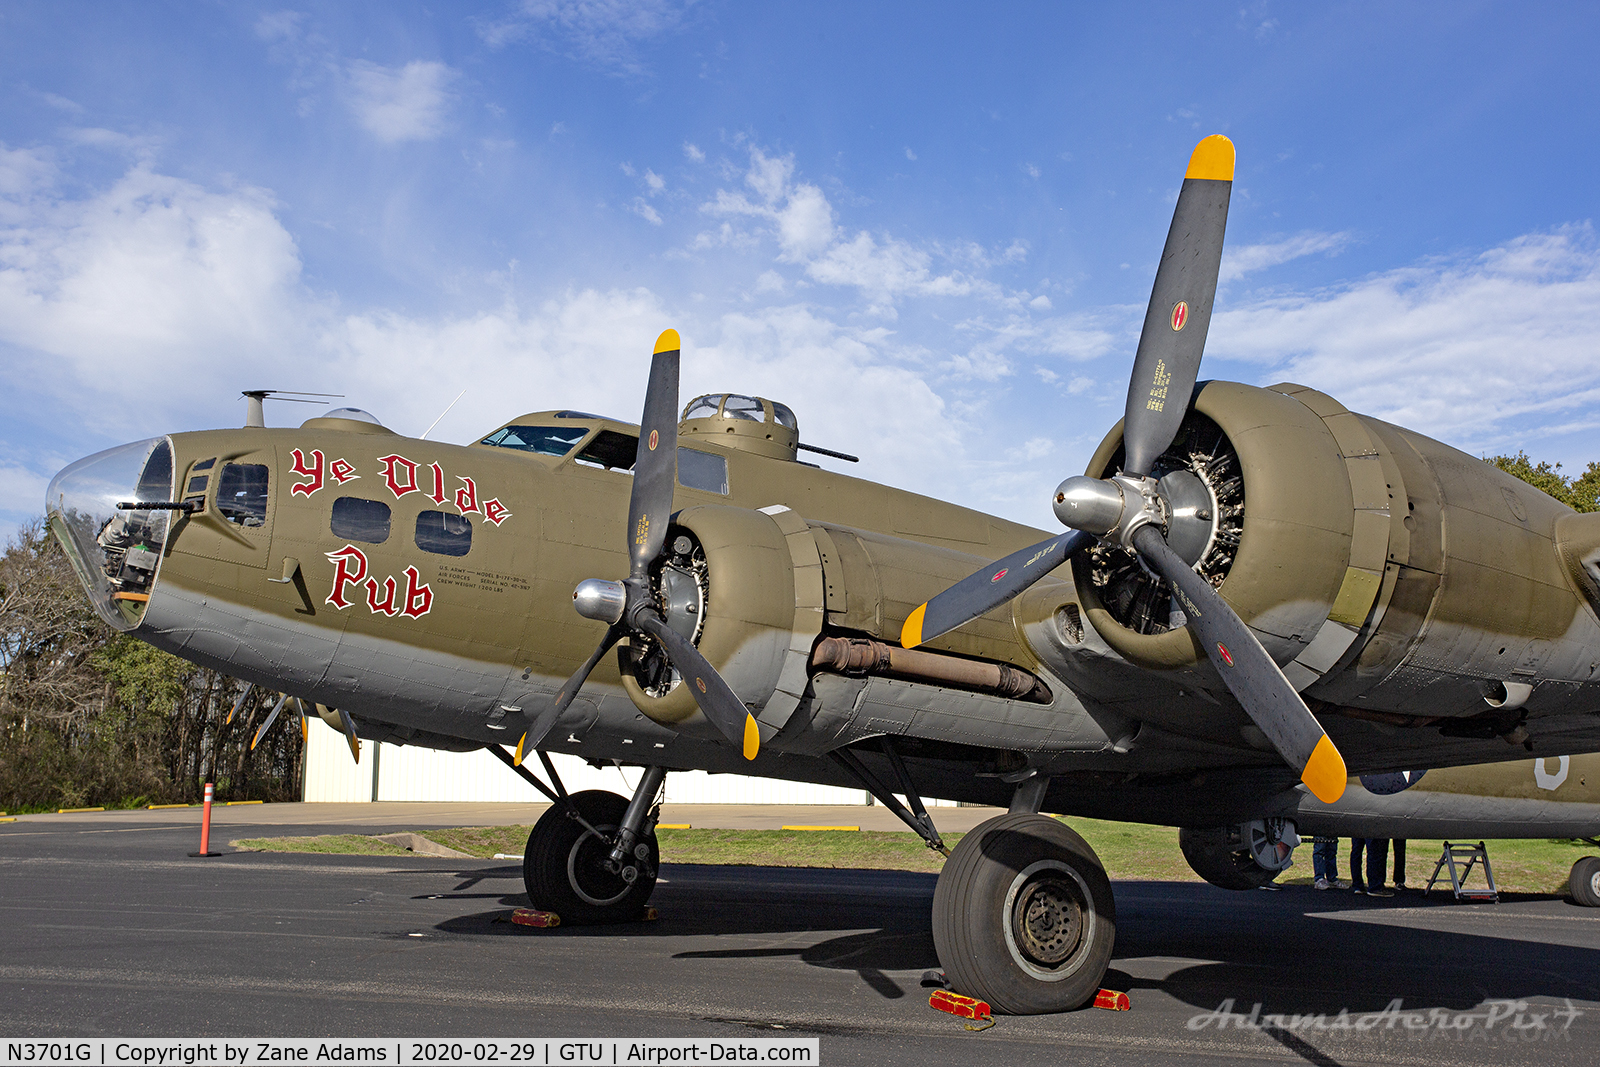 N3701G, 1944 Boeing B-17G Flying Fortress C/N 44-48543, Formerly known as Chuckie and Madris Maiden, now in Ye Olde Pub paint